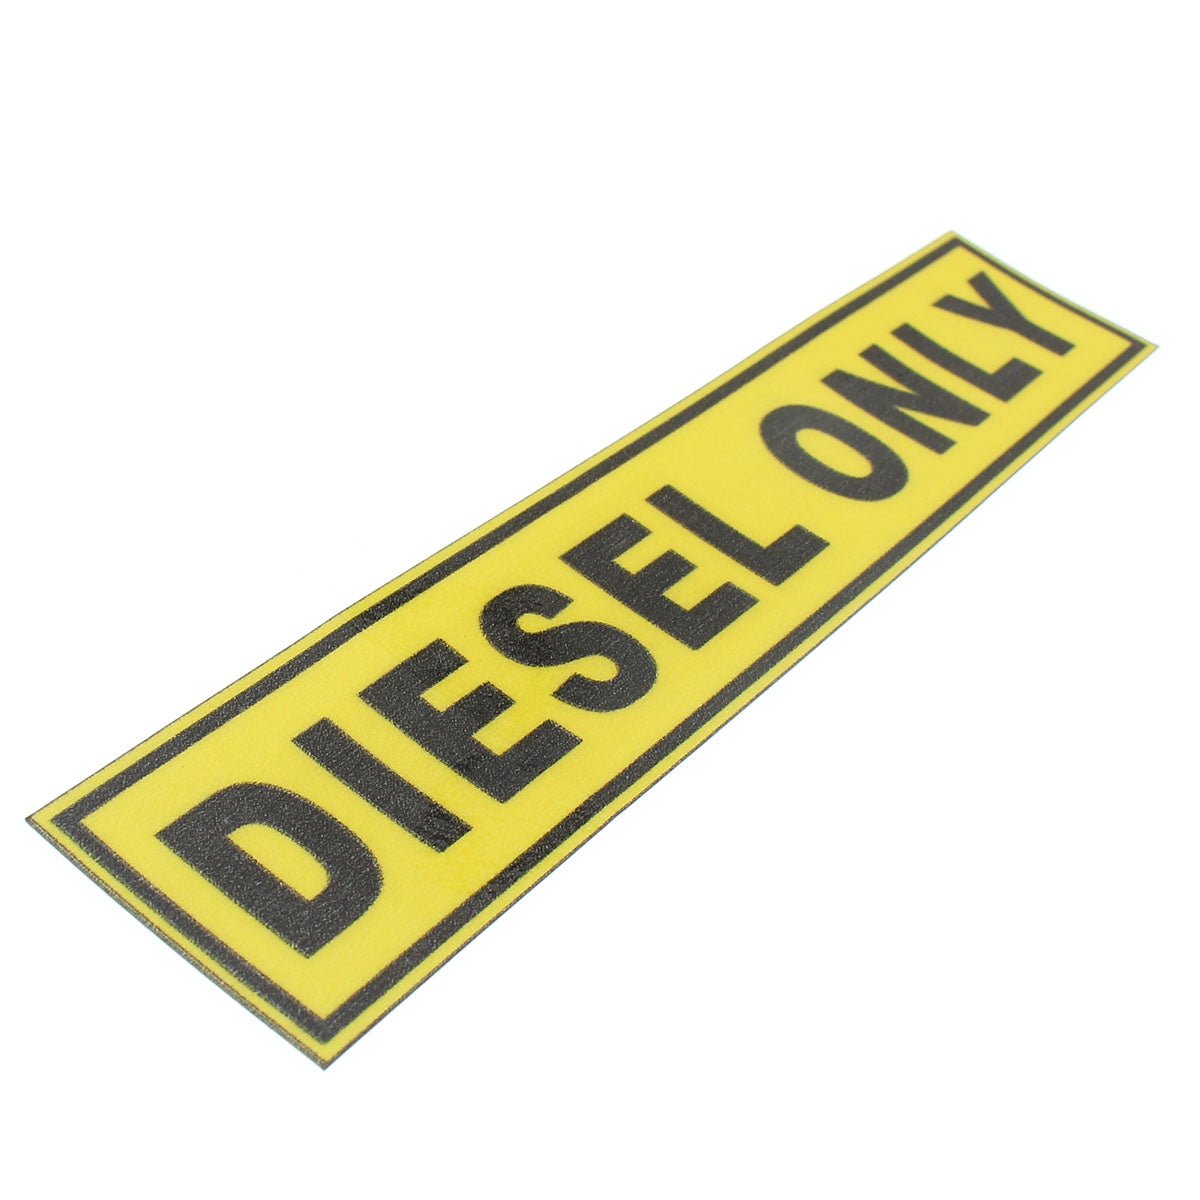 Light Goldenrod 31*156mm DIESEL ONLY Vinyl Safety Sticker Label Waterproof Signs Car Taxi